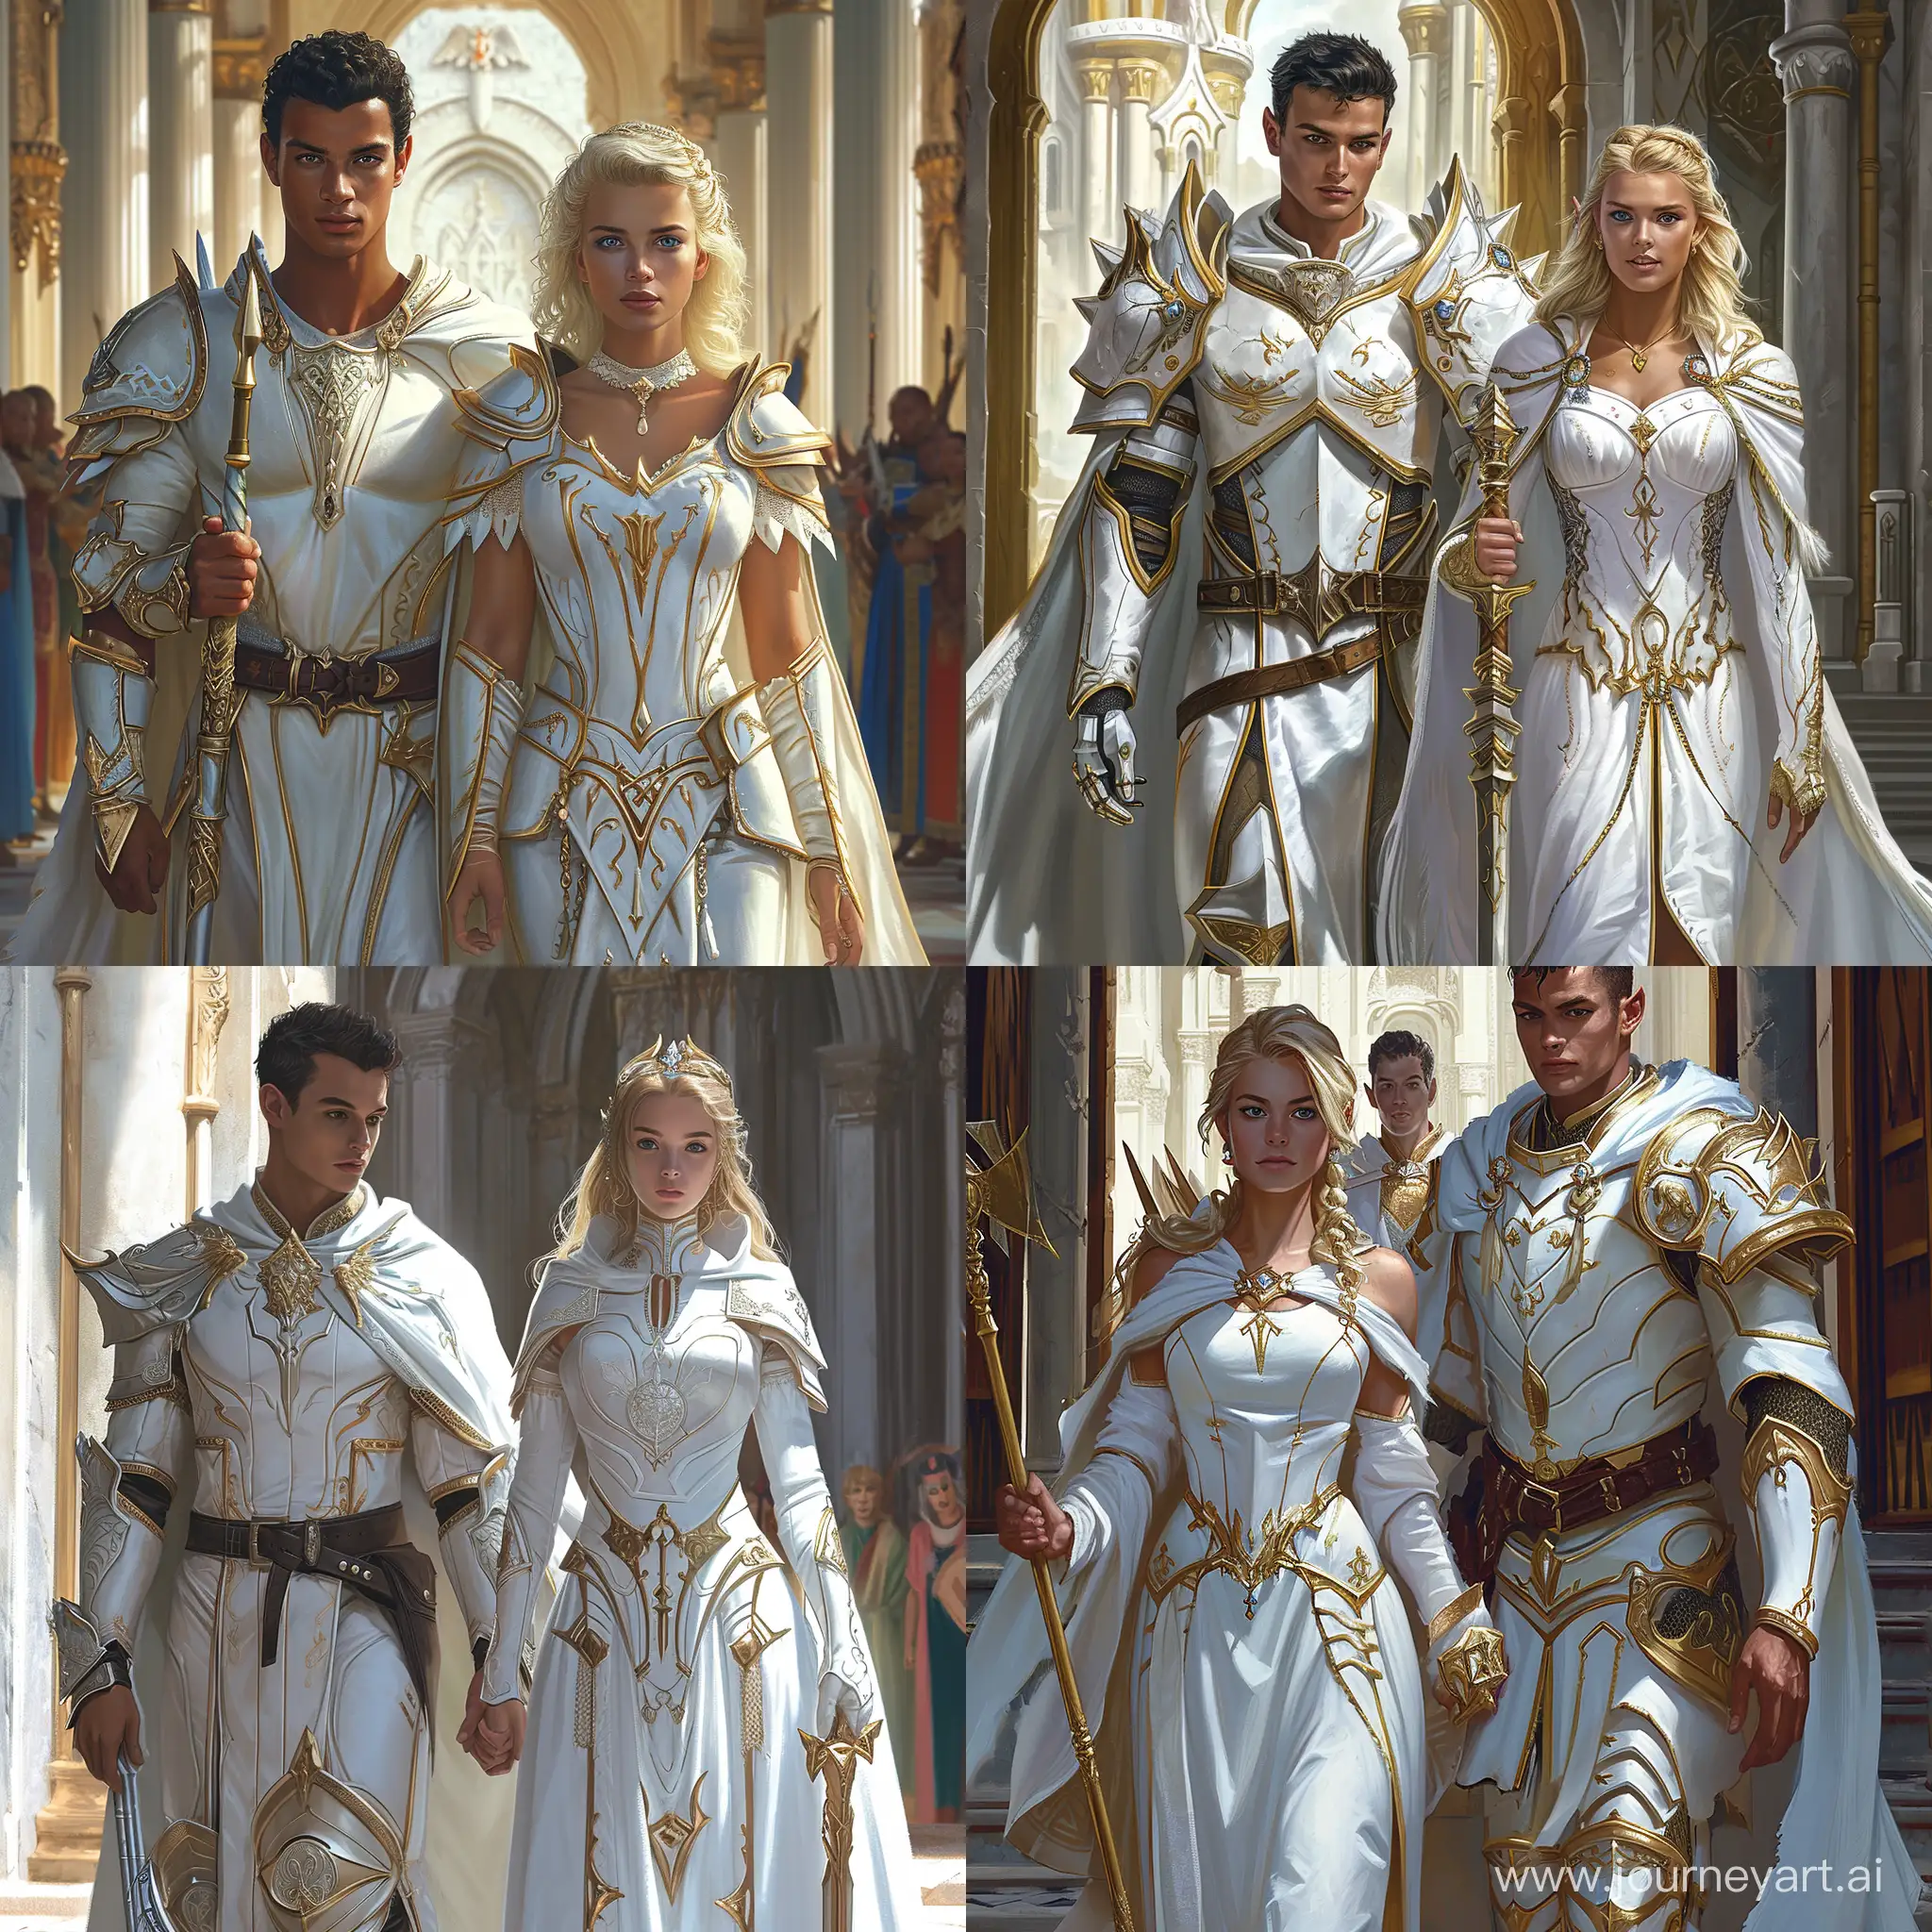 A young queen entering royal court, accompanied by her paladin guard. The queen is dressed in white regal robes and holds a sceptre. The paladin is wearing white and gold elite armor, with a sheathed greatsword, he has dark hair and tan skin and is tall. The queen has blonde hair, blue eyes, fair skin and is shorter, she has a cute complexion. Photorealistic, highly detailed.